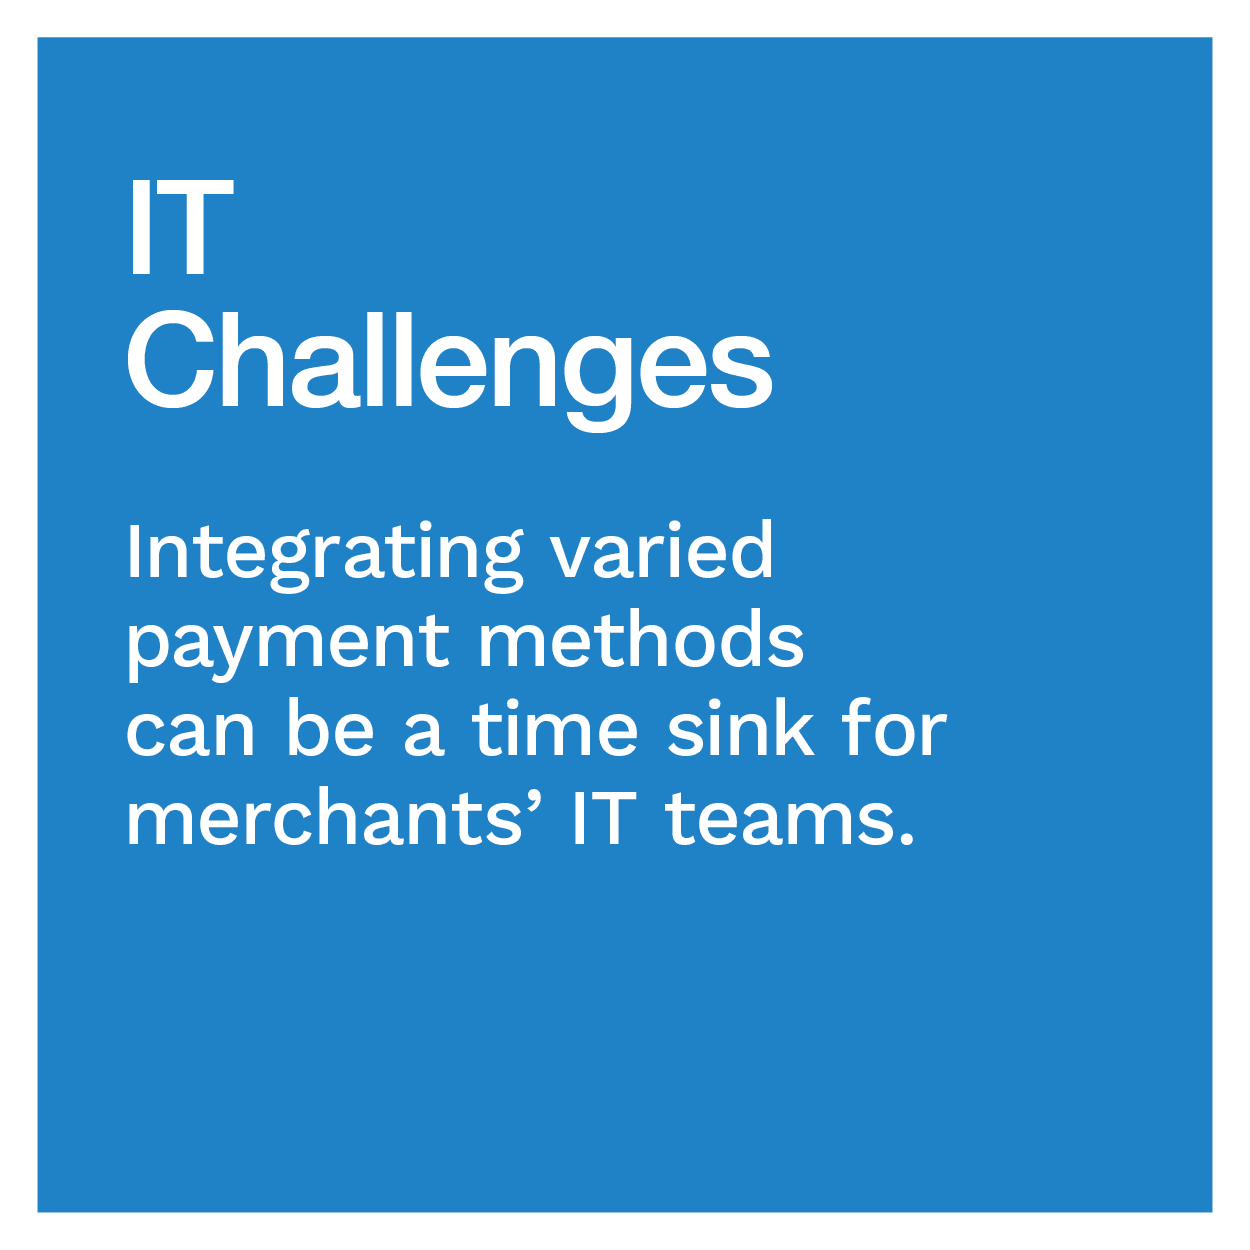 IT Challenges: Integrating varied payment methods can be a time sink for merchants’ IT teams.